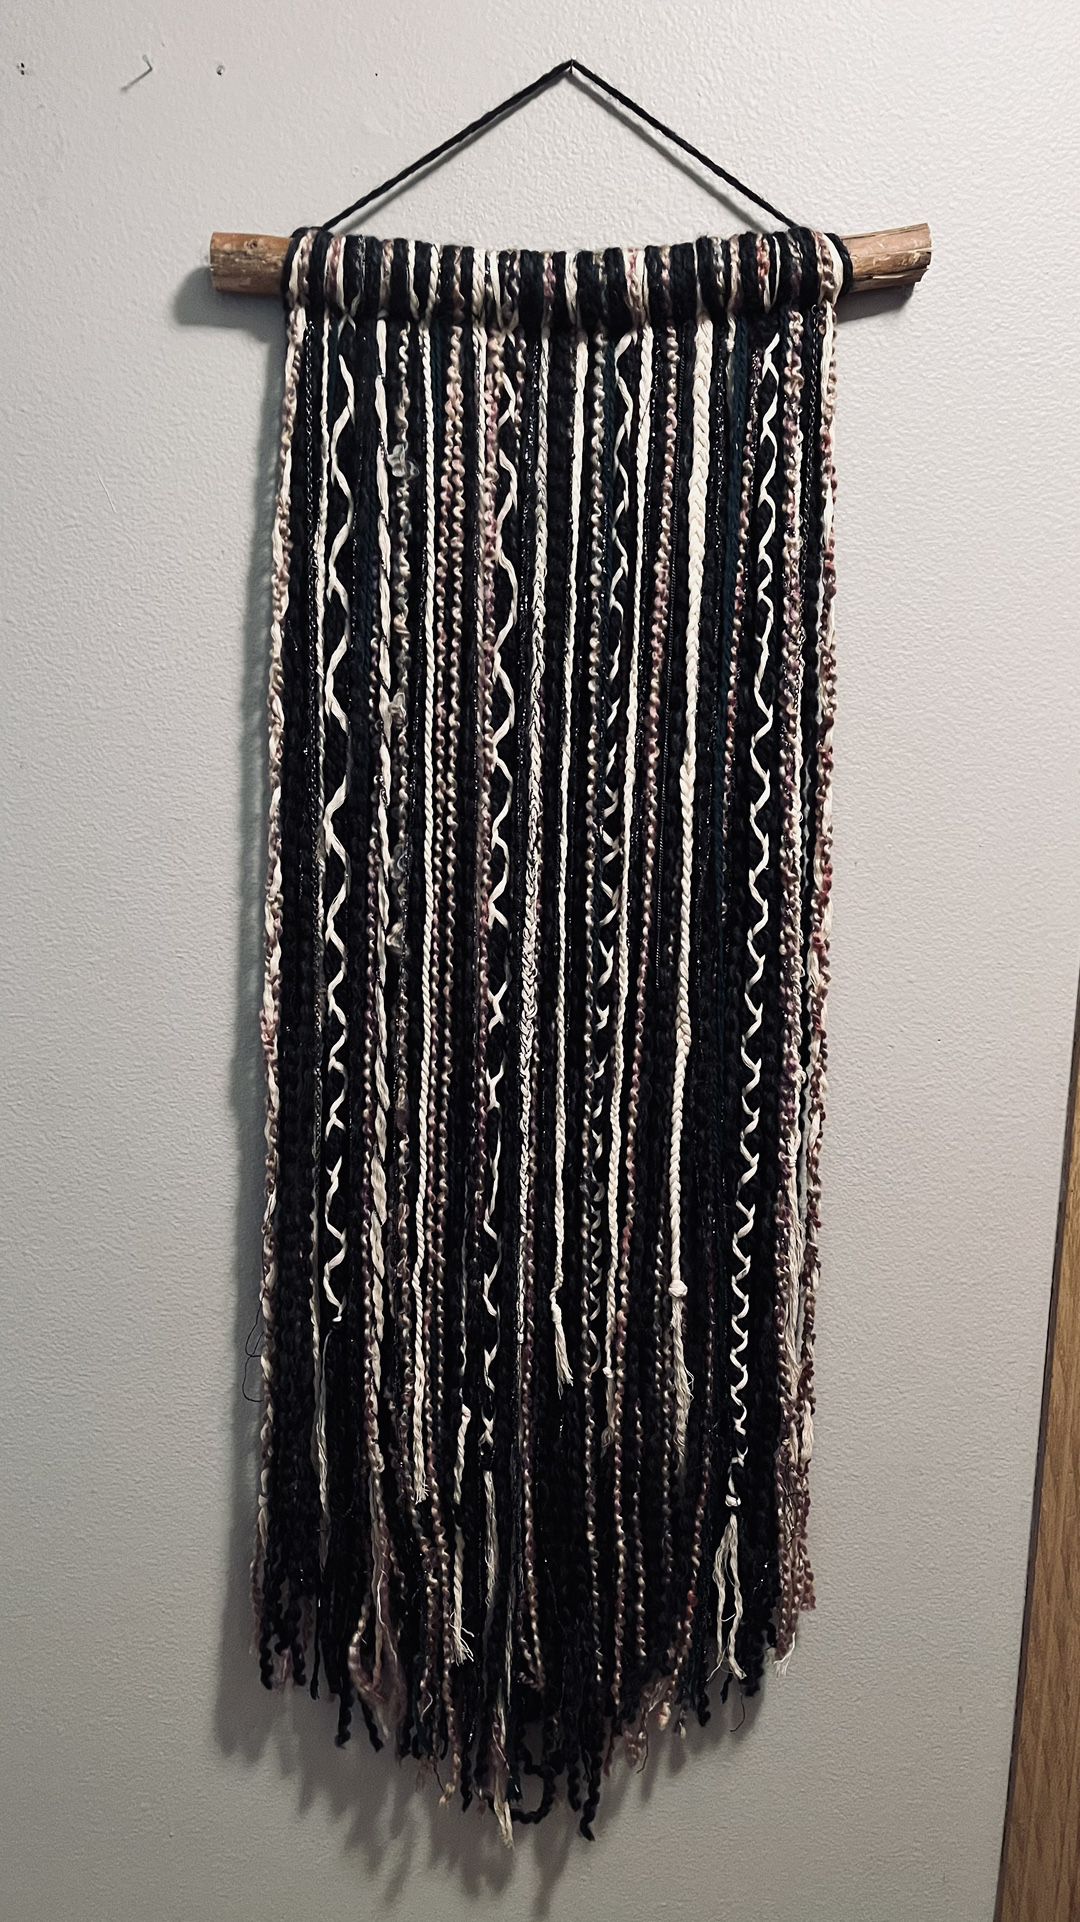 Handmade Woven Rope and Wood Tapestry 